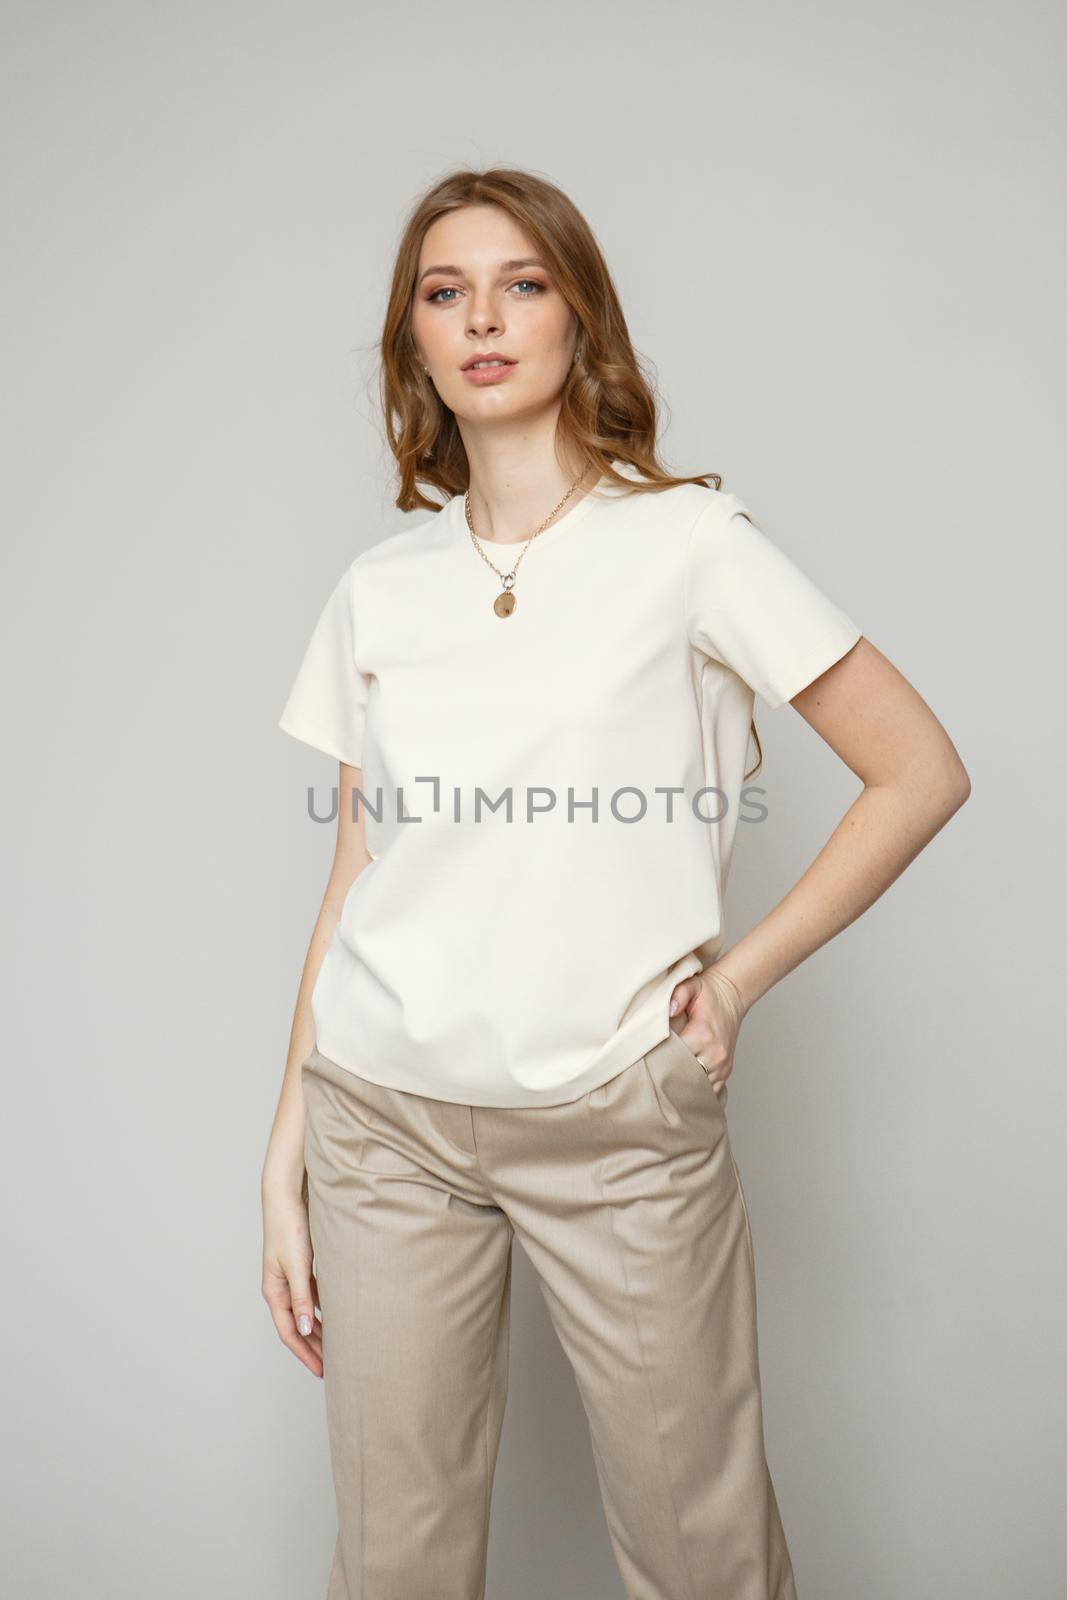 A model in brown casual clothes on a studio background. Shooting fashion clothes by deandy